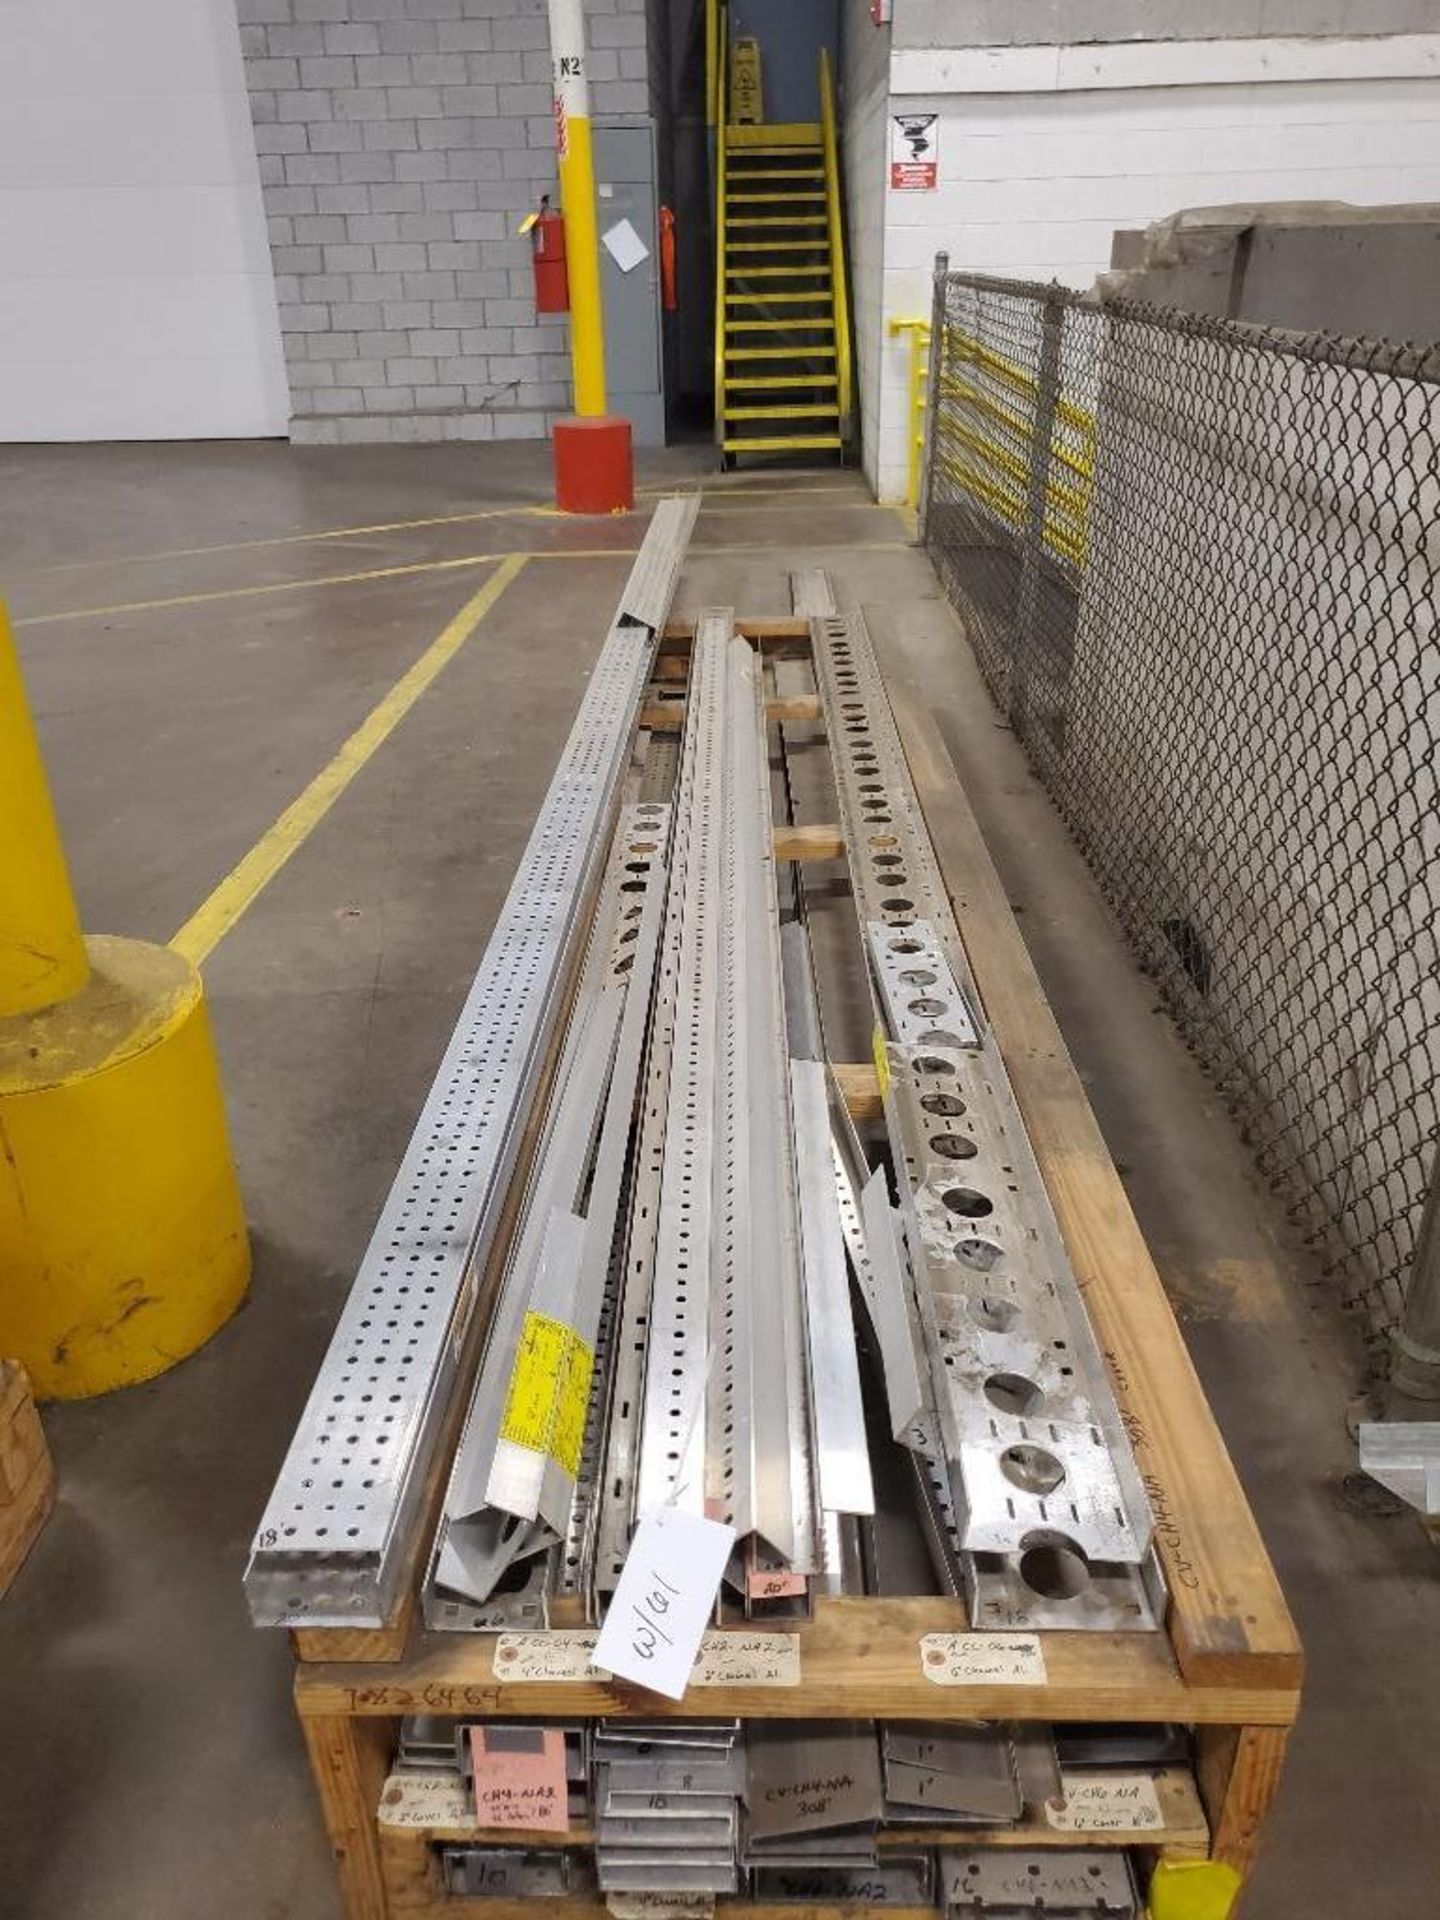 LOT OF ASSORTED DINRAIL, UNISTRUT, PVC, COATED AND HEAVY WALL CONDUIT, AND CHANNEL CABLE TRAY - Image 6 of 6